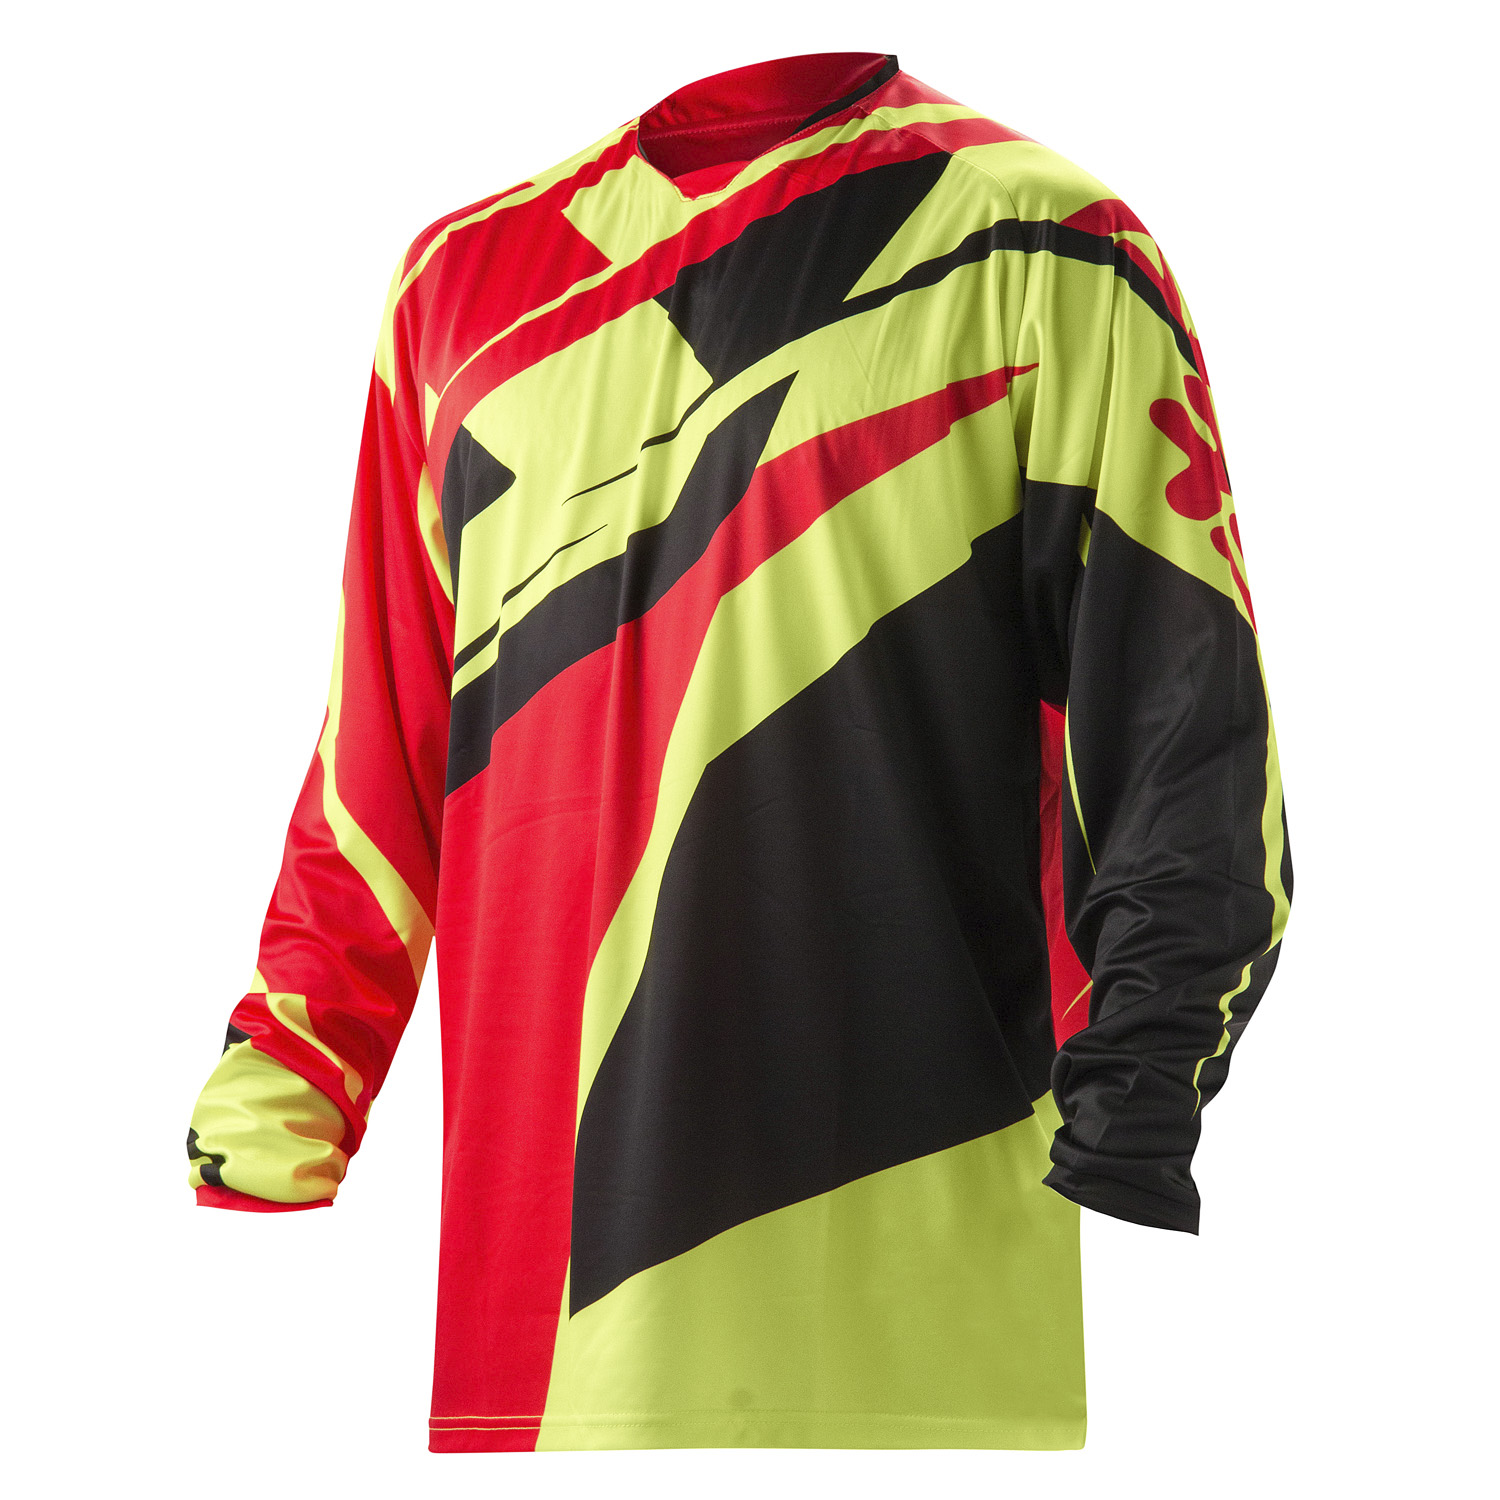 Acerbis Jersey Profile Rot/Fluo Gelb